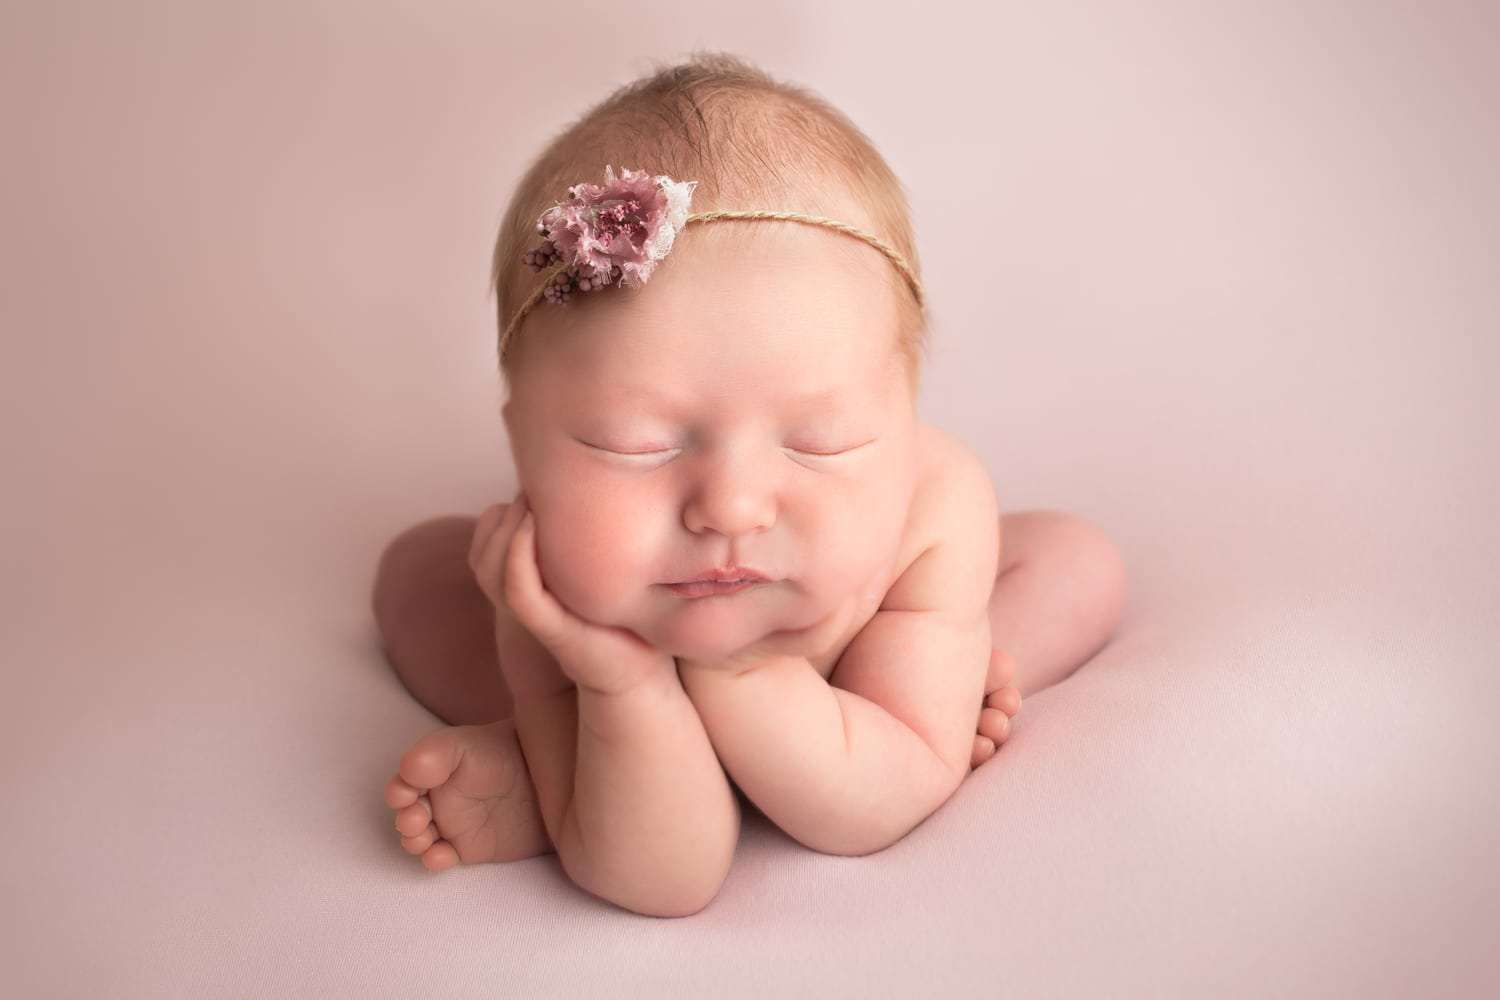 newborn photographer in rochester ny captures sleeping newborn baby in froggy pose